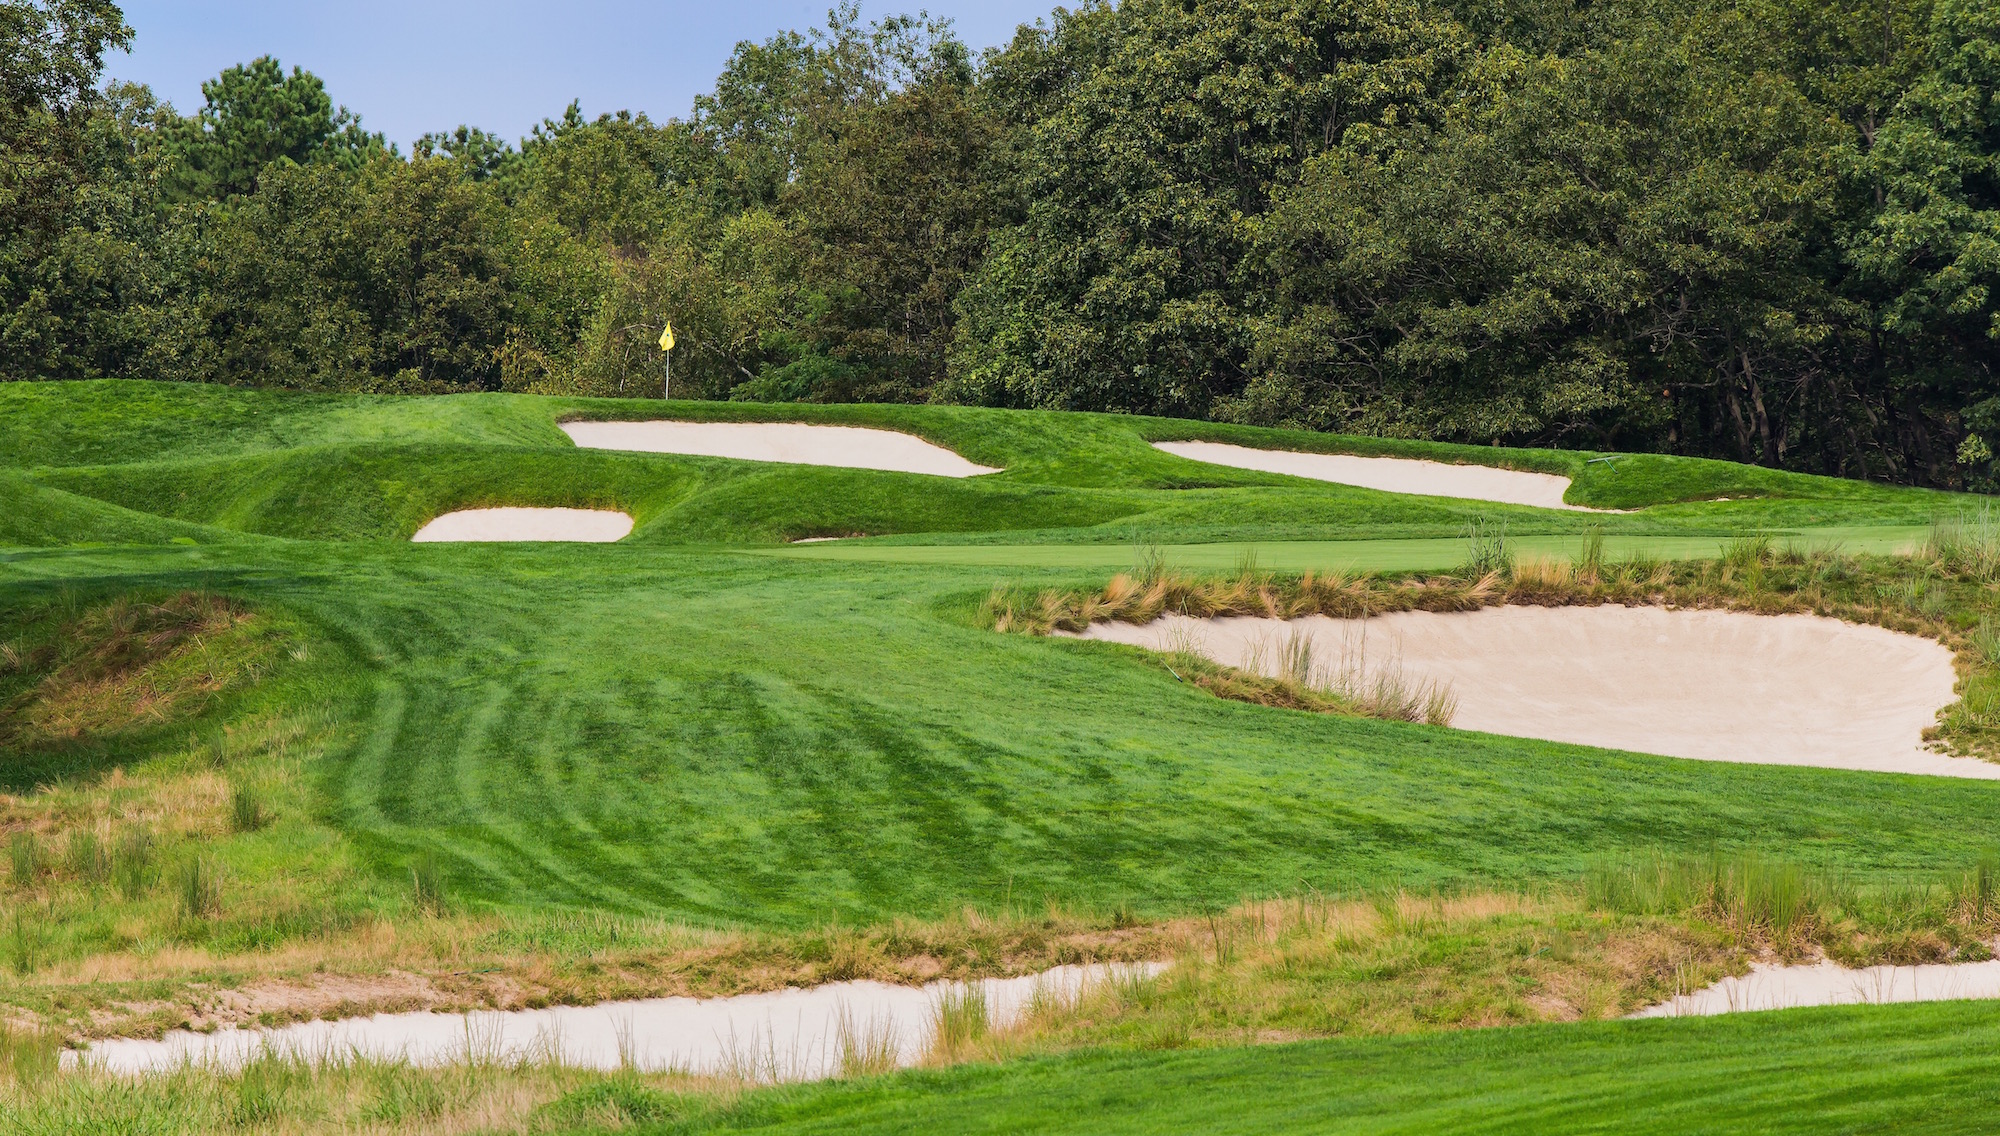 The 4th hole at Bethpage Black. (David W. Leindecker/Shutterstock.com)